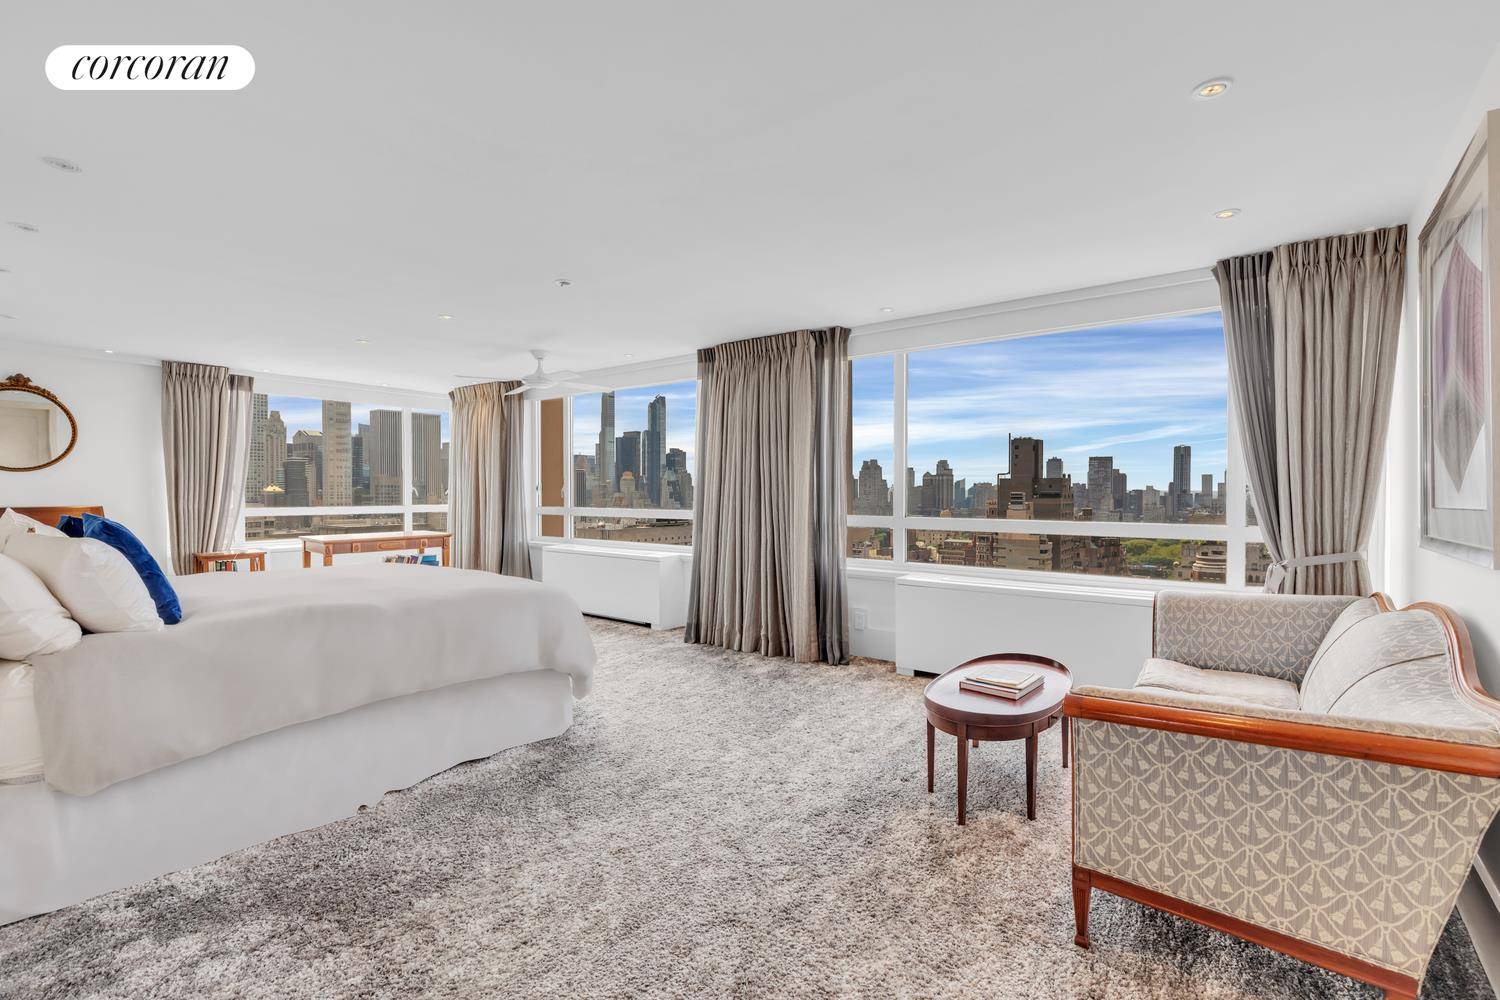 UNPARALLELED SPACE, VIEWS and LOCATIONOverlooking Central Park, Midtown and Columbus Circle, Residence 34DCis a sprawling 6 bedroom, 4, 100 SF home offering unparalleled views in three directions.